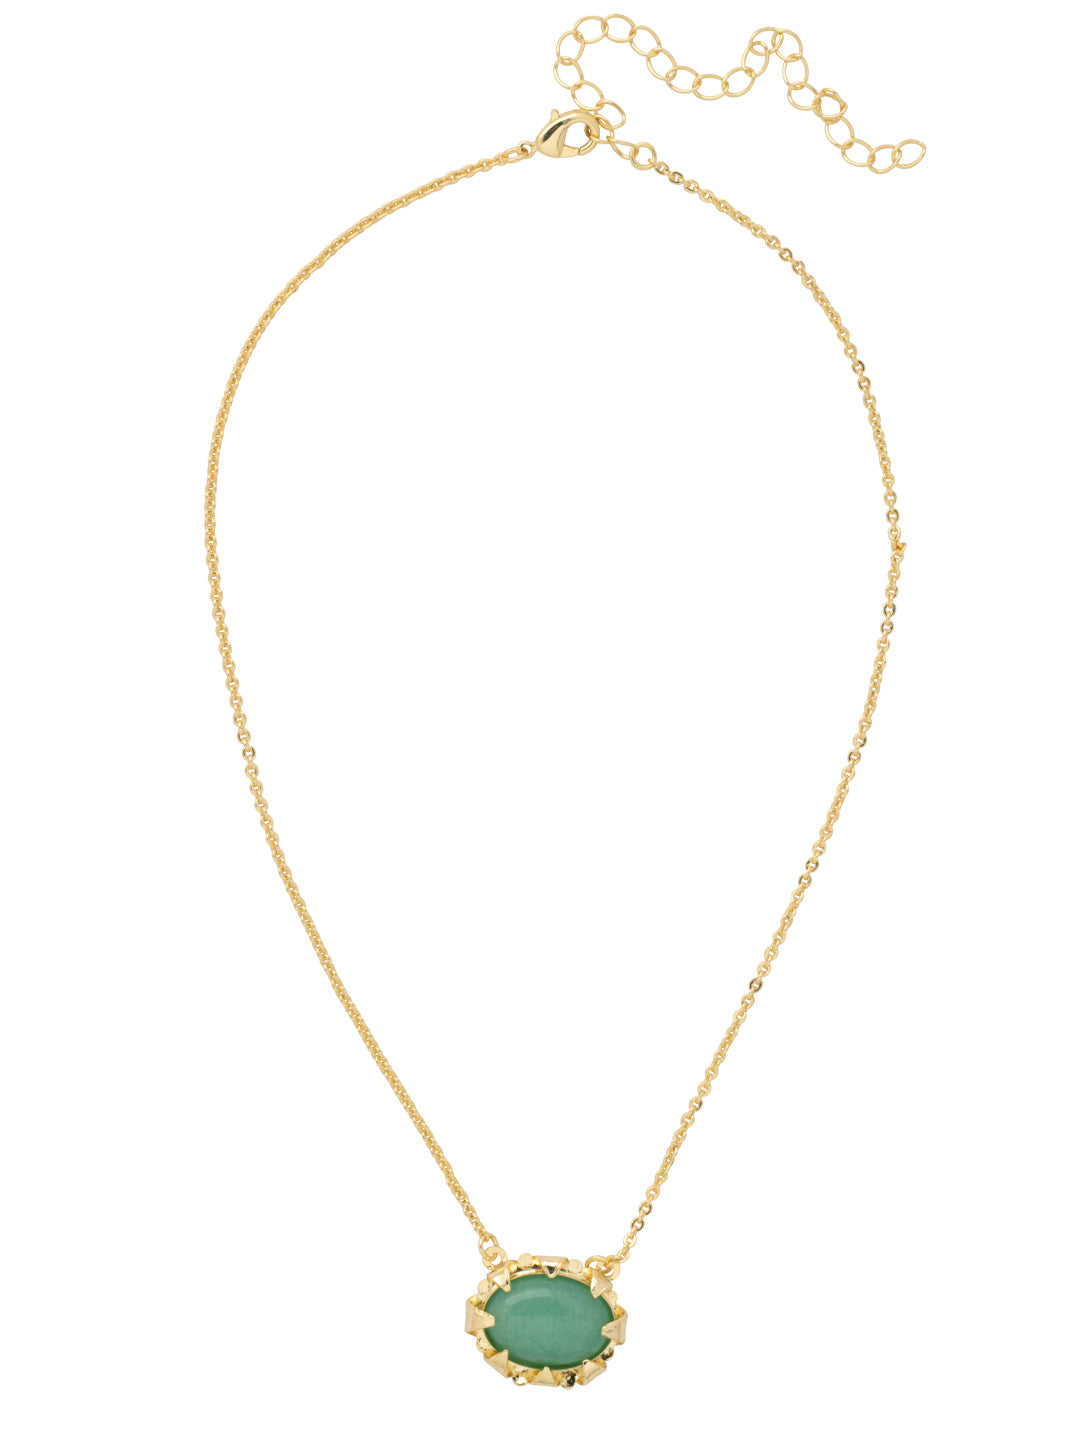 Jaded Oval Pendant Necklace - 4NFJ9BGAES - <p>The Jaded Oval Pendant Necklace features a single oval semi-precious stone on an adjustable chain, secured by a lobster claw clasp. From Sorrelli's Aegean Sea collection in our Bright Gold-tone finish.</p>